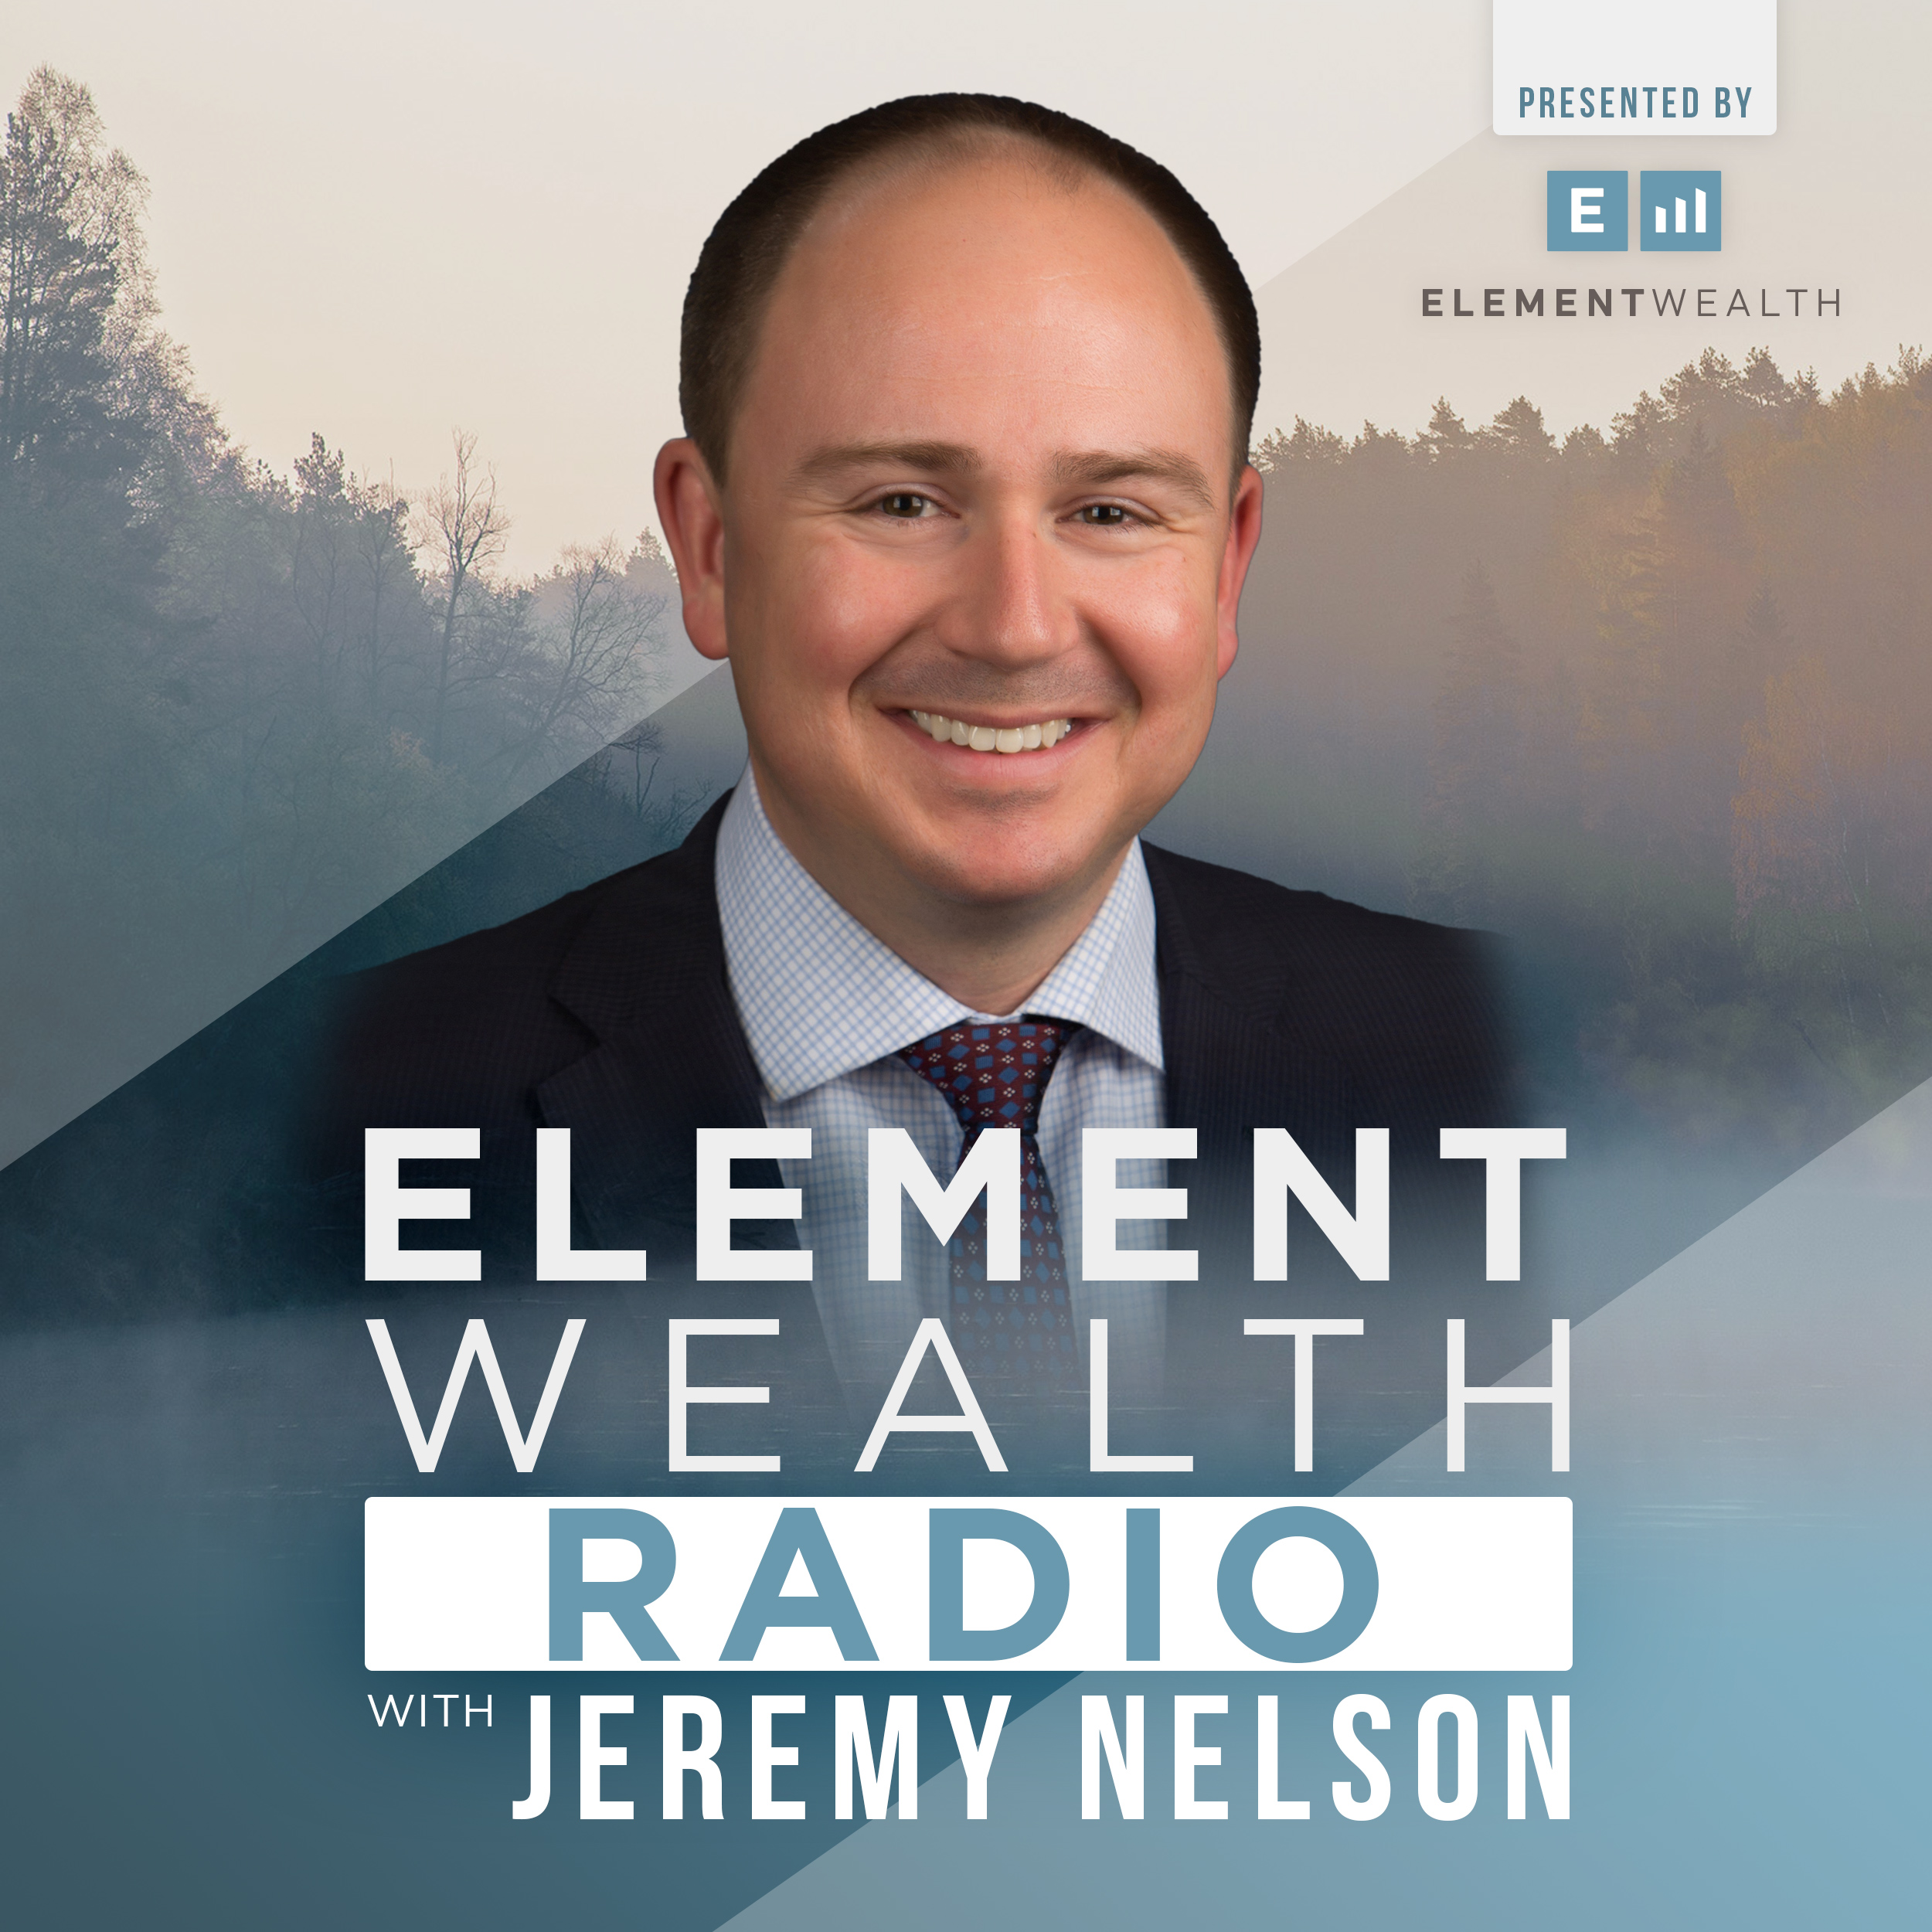 Element Wealth Radio with Jeremy Nelson